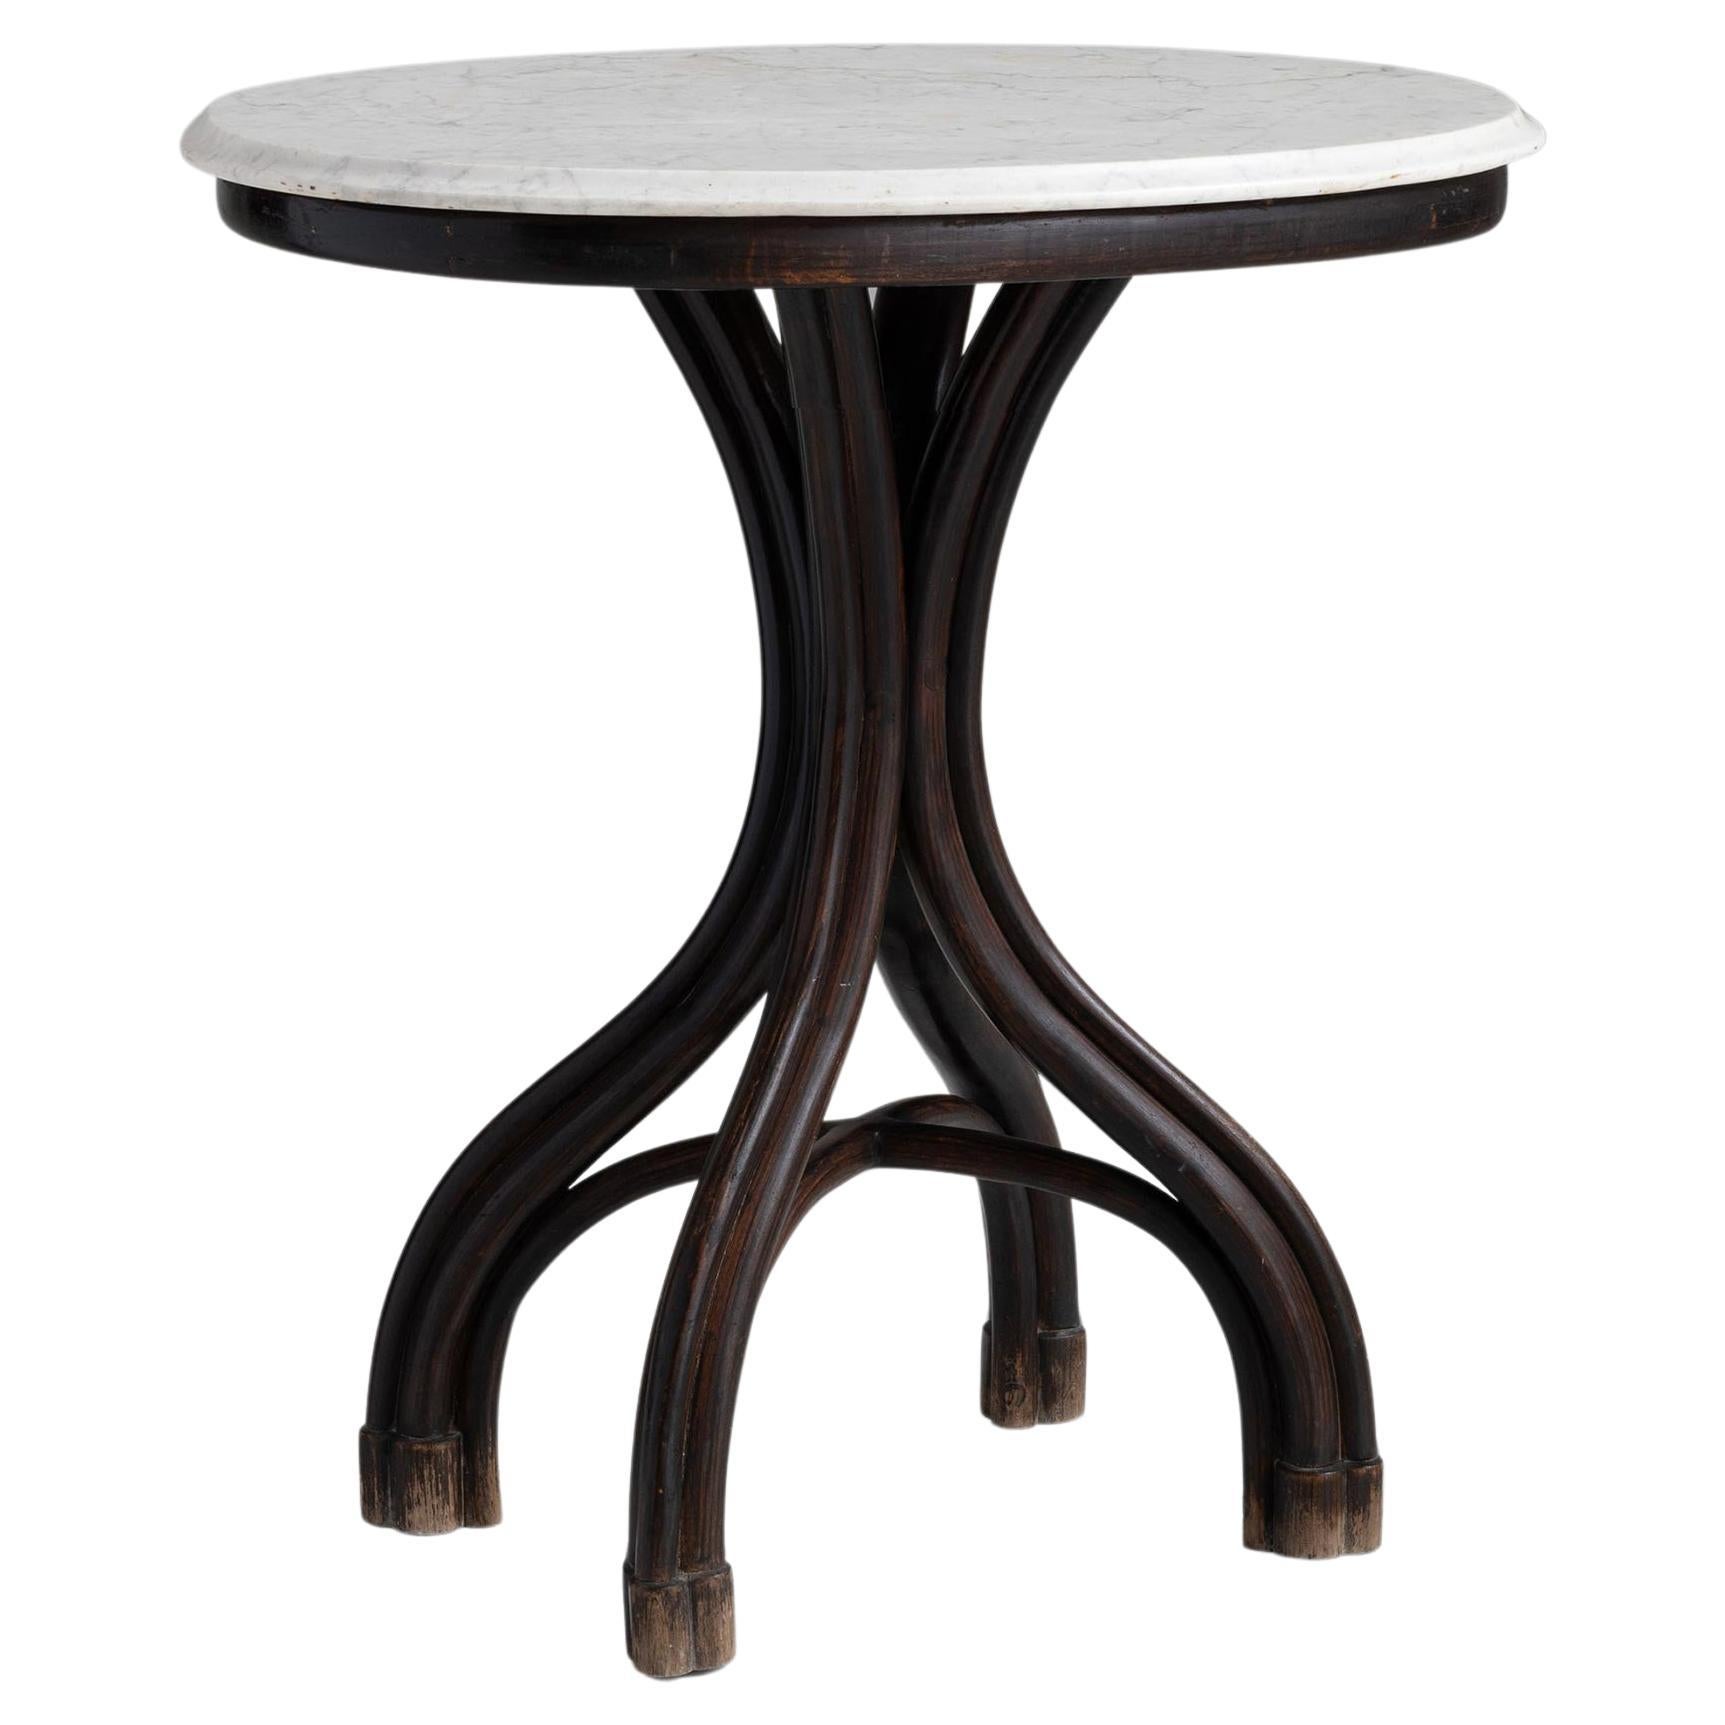 Bentwood with Marble Top Side Table by Thonet, Austria circa 1870